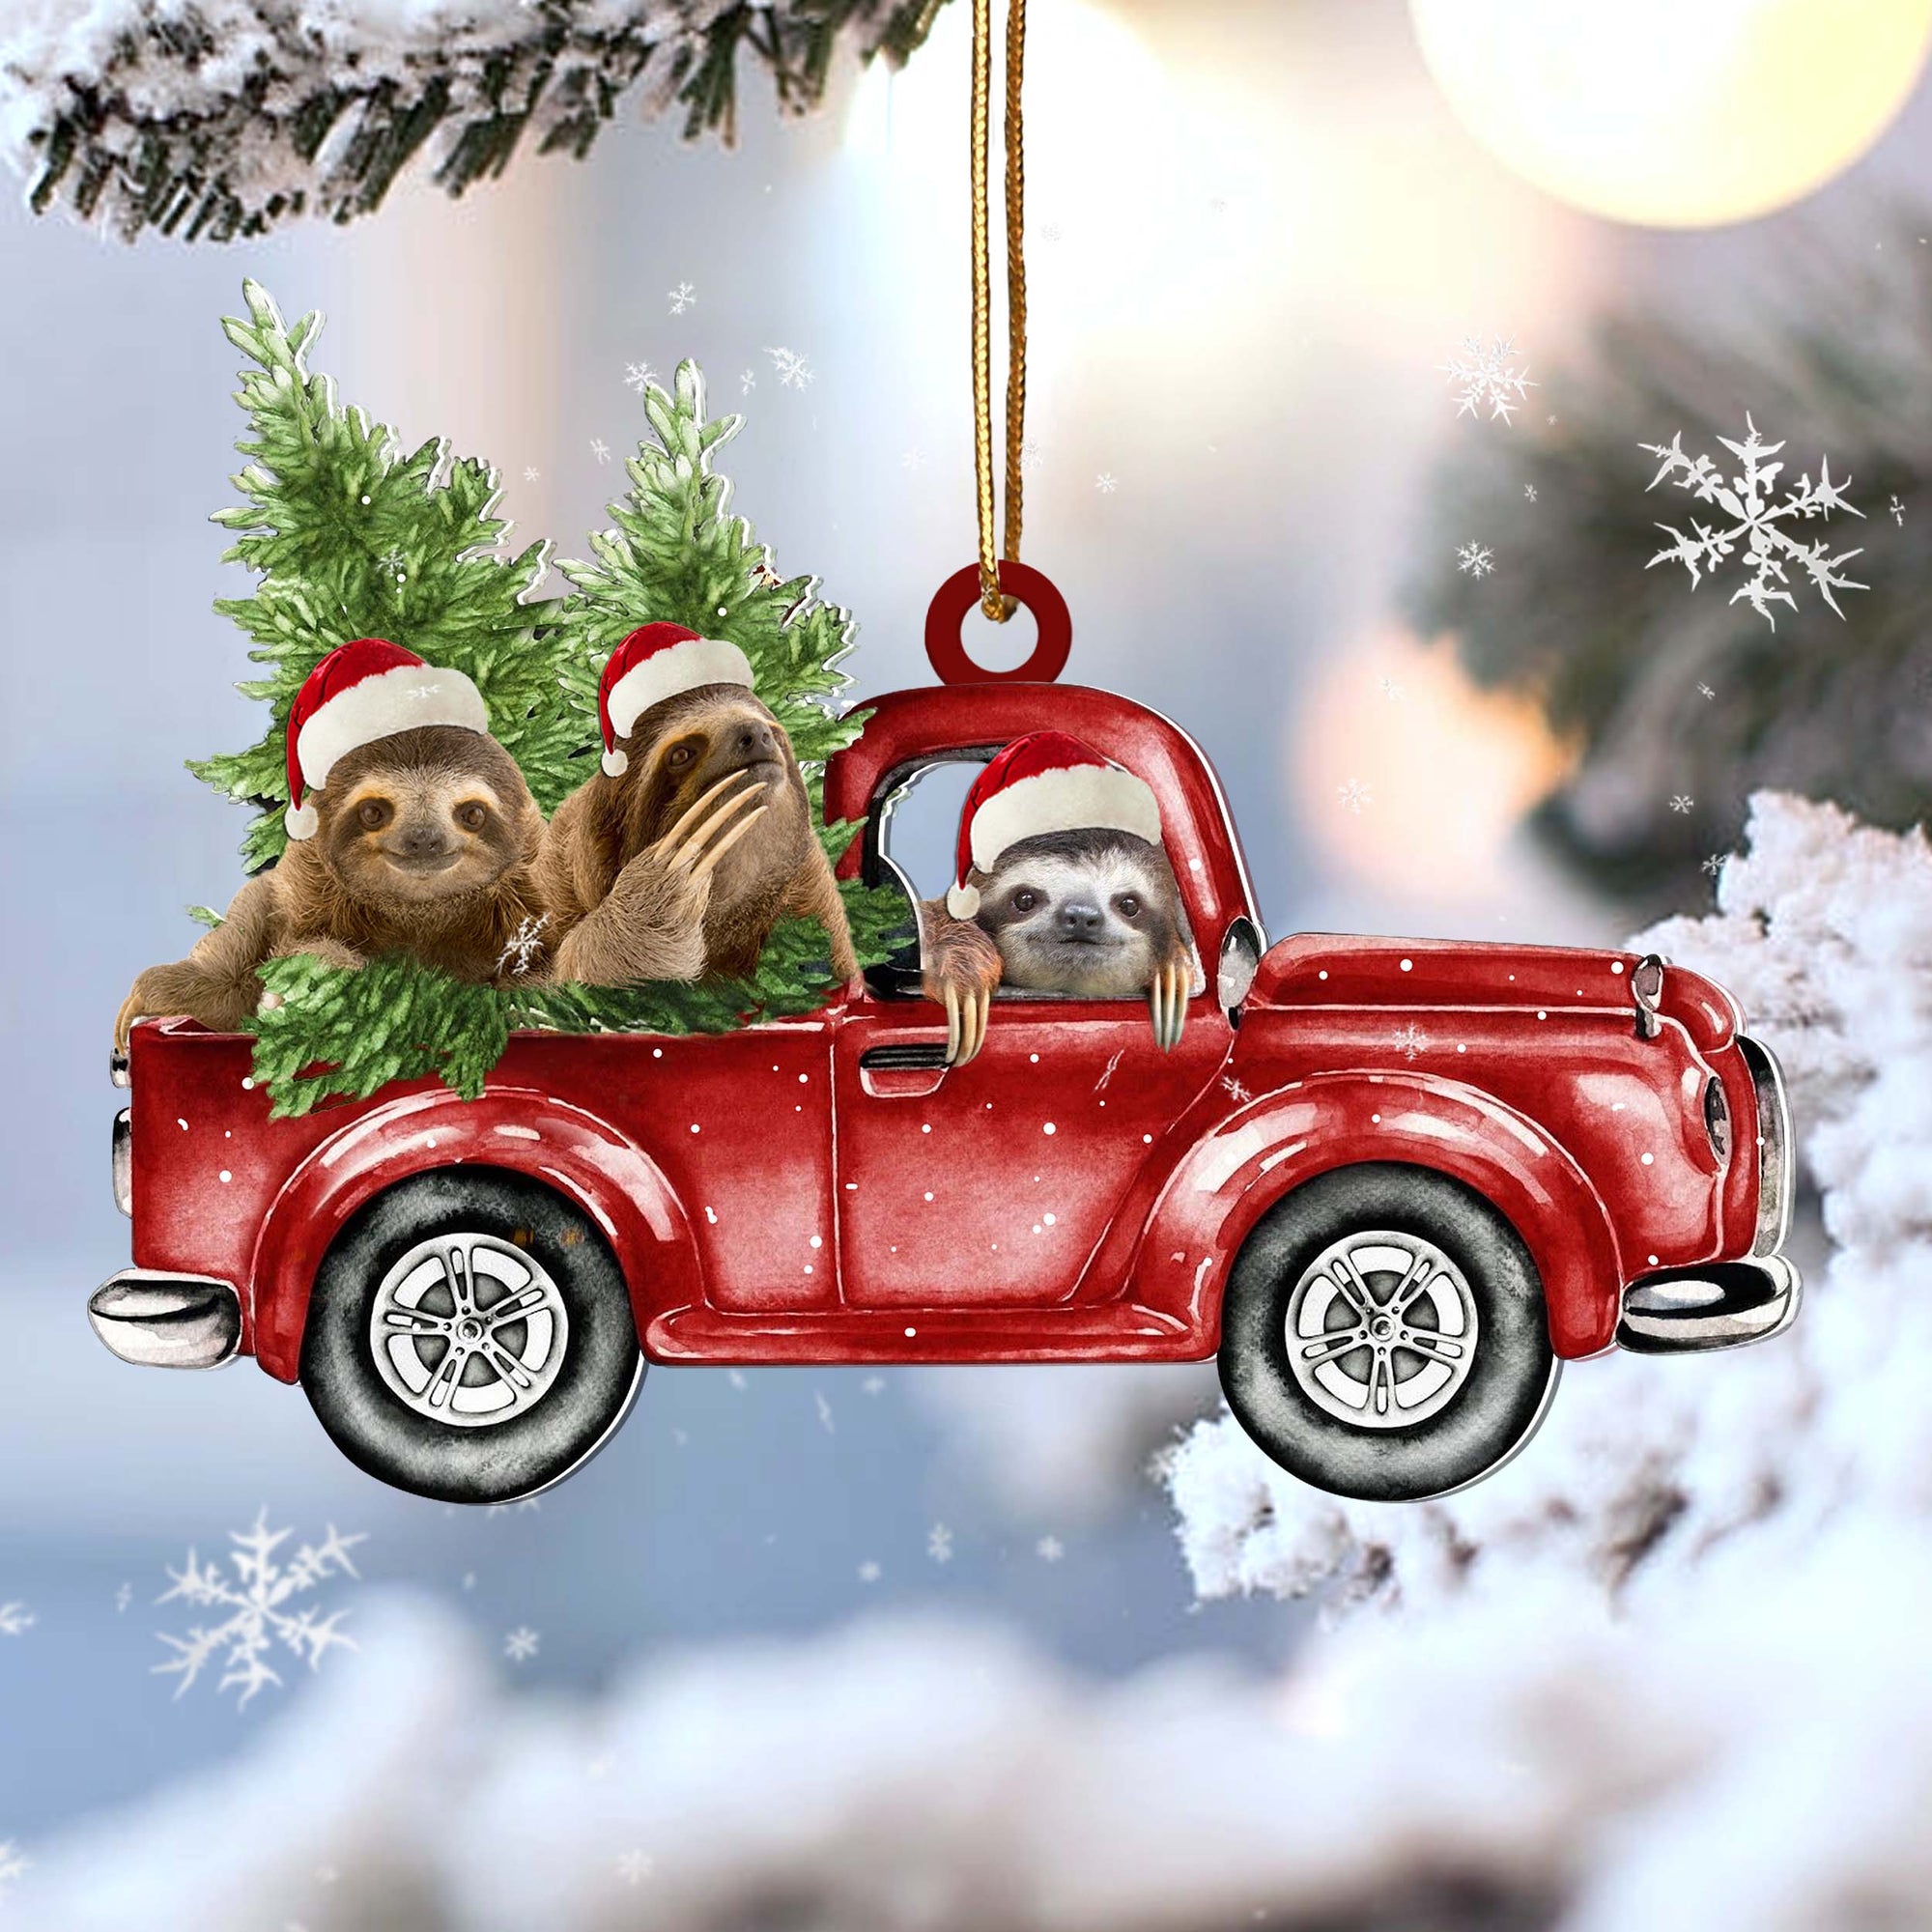 Sloth red car gift for sloth lover gift animal lover ornament